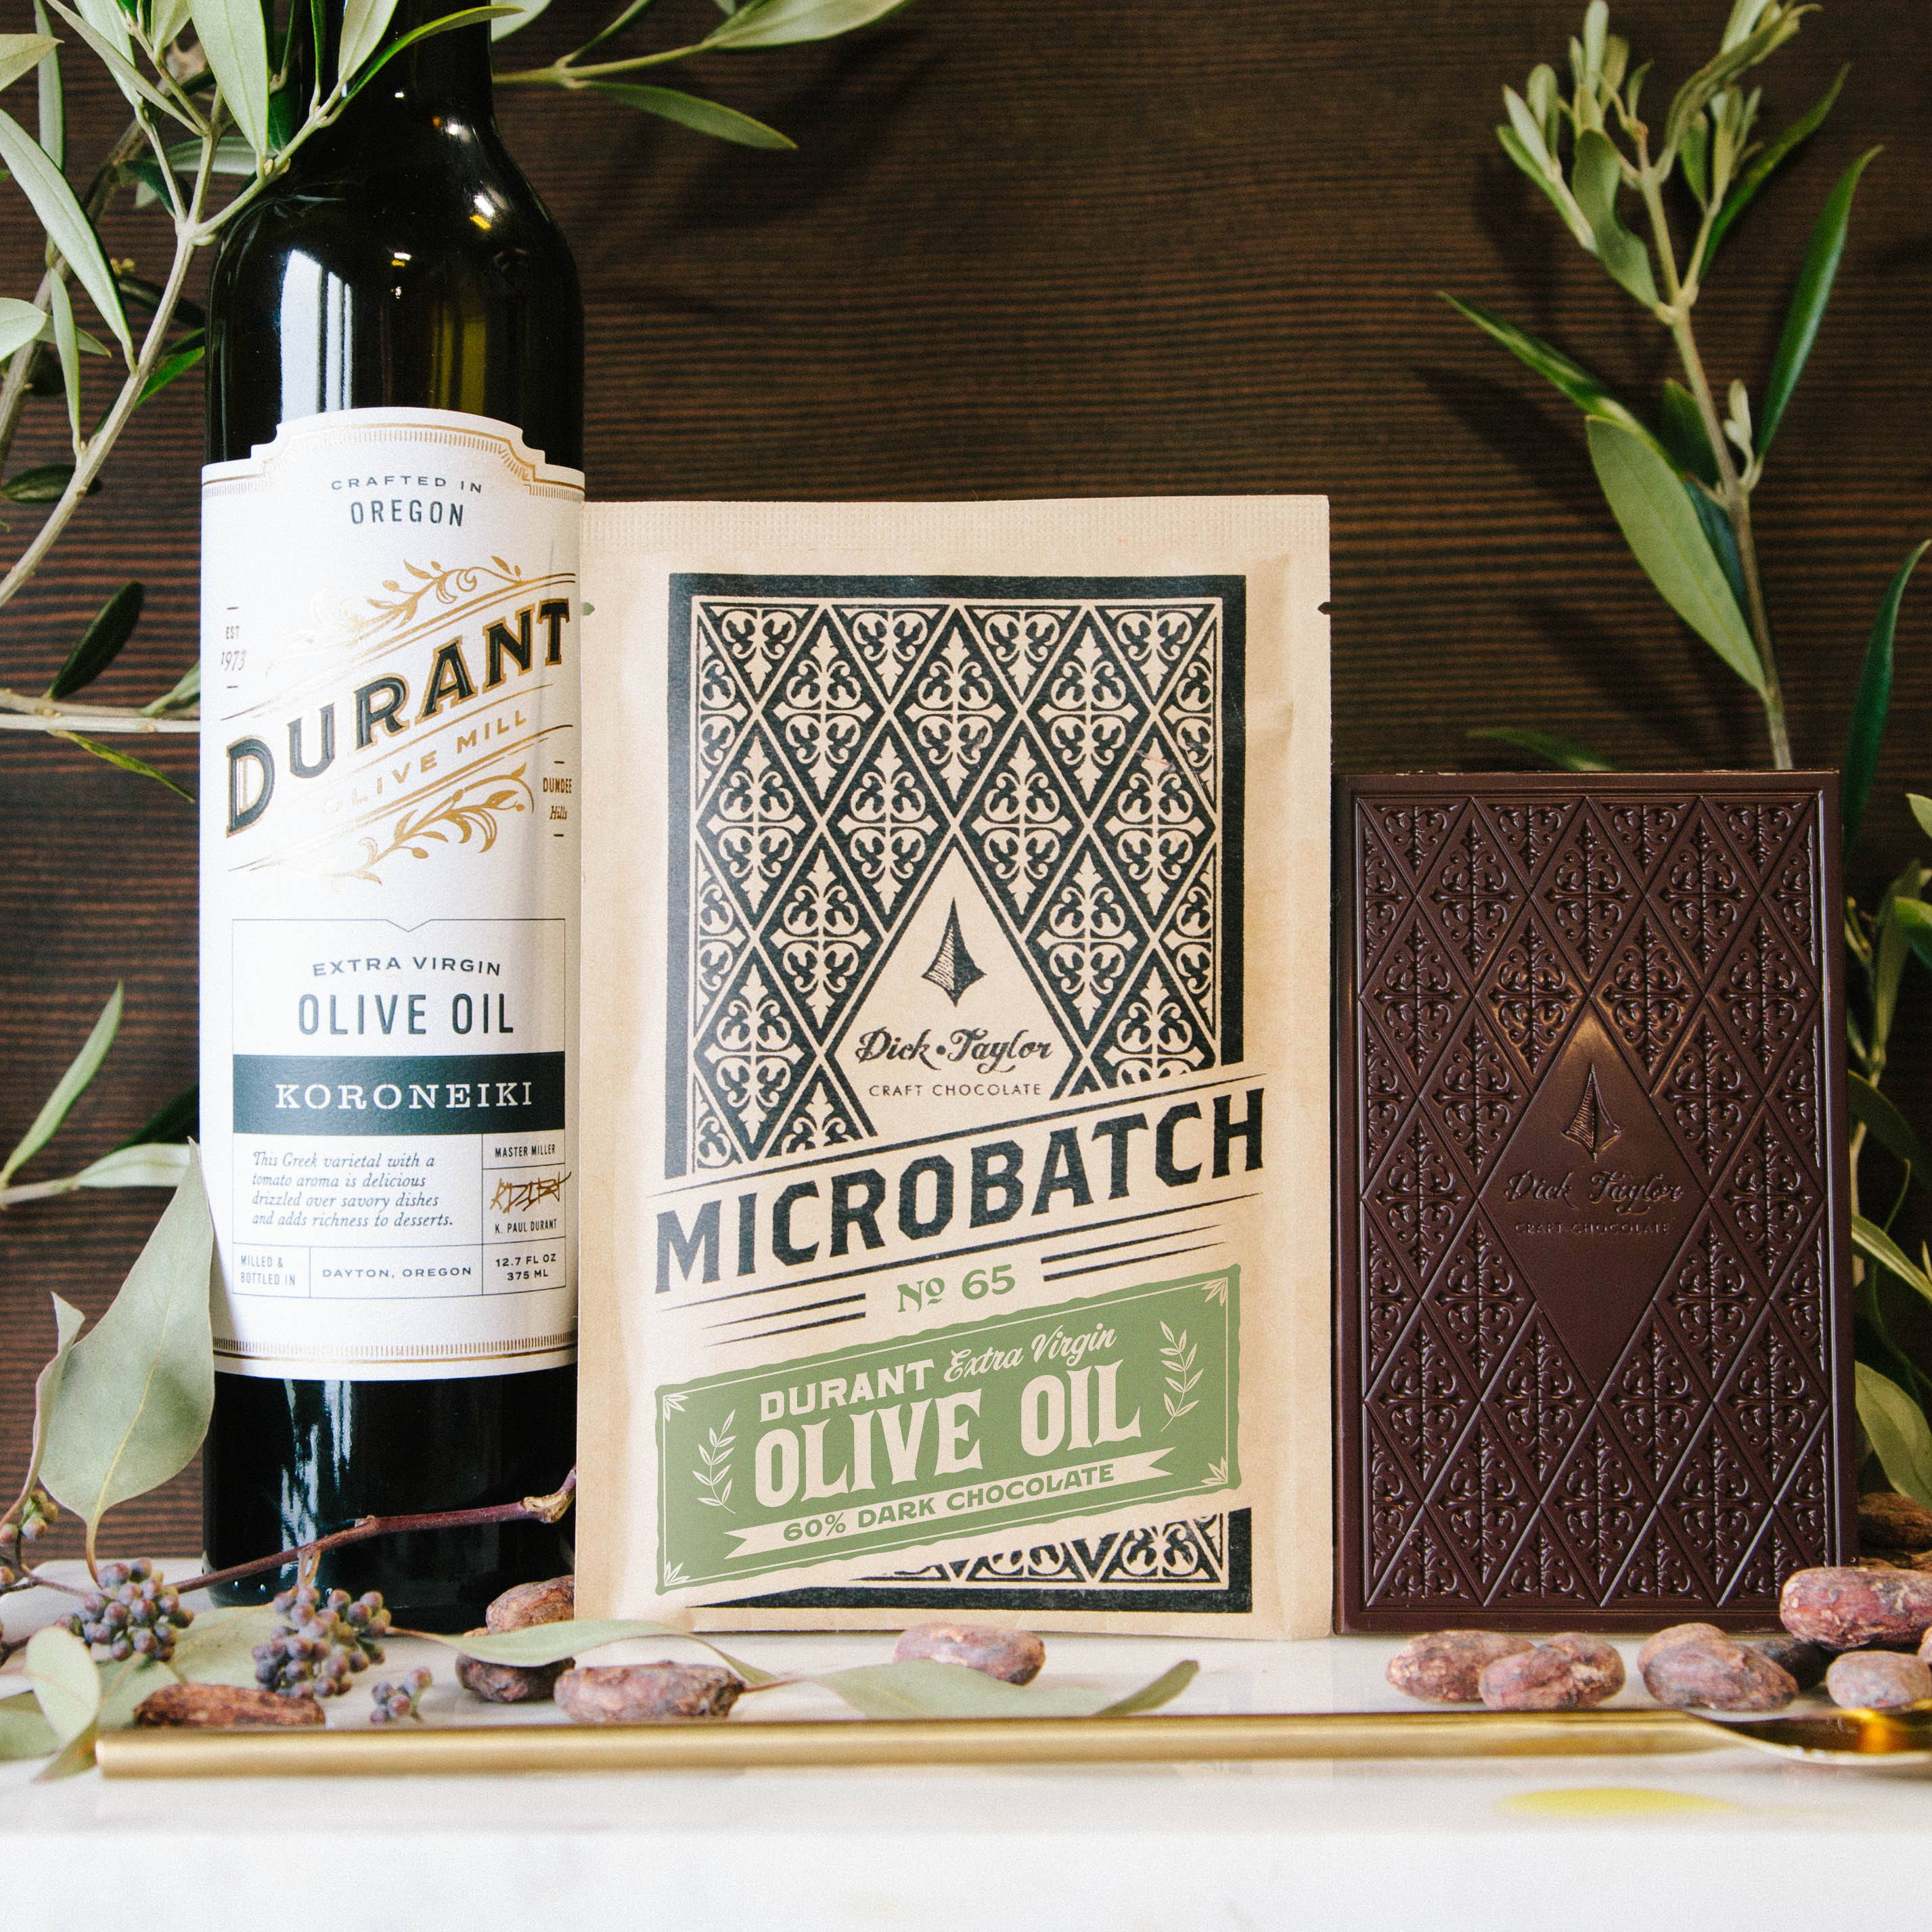 Olive oil microbatch